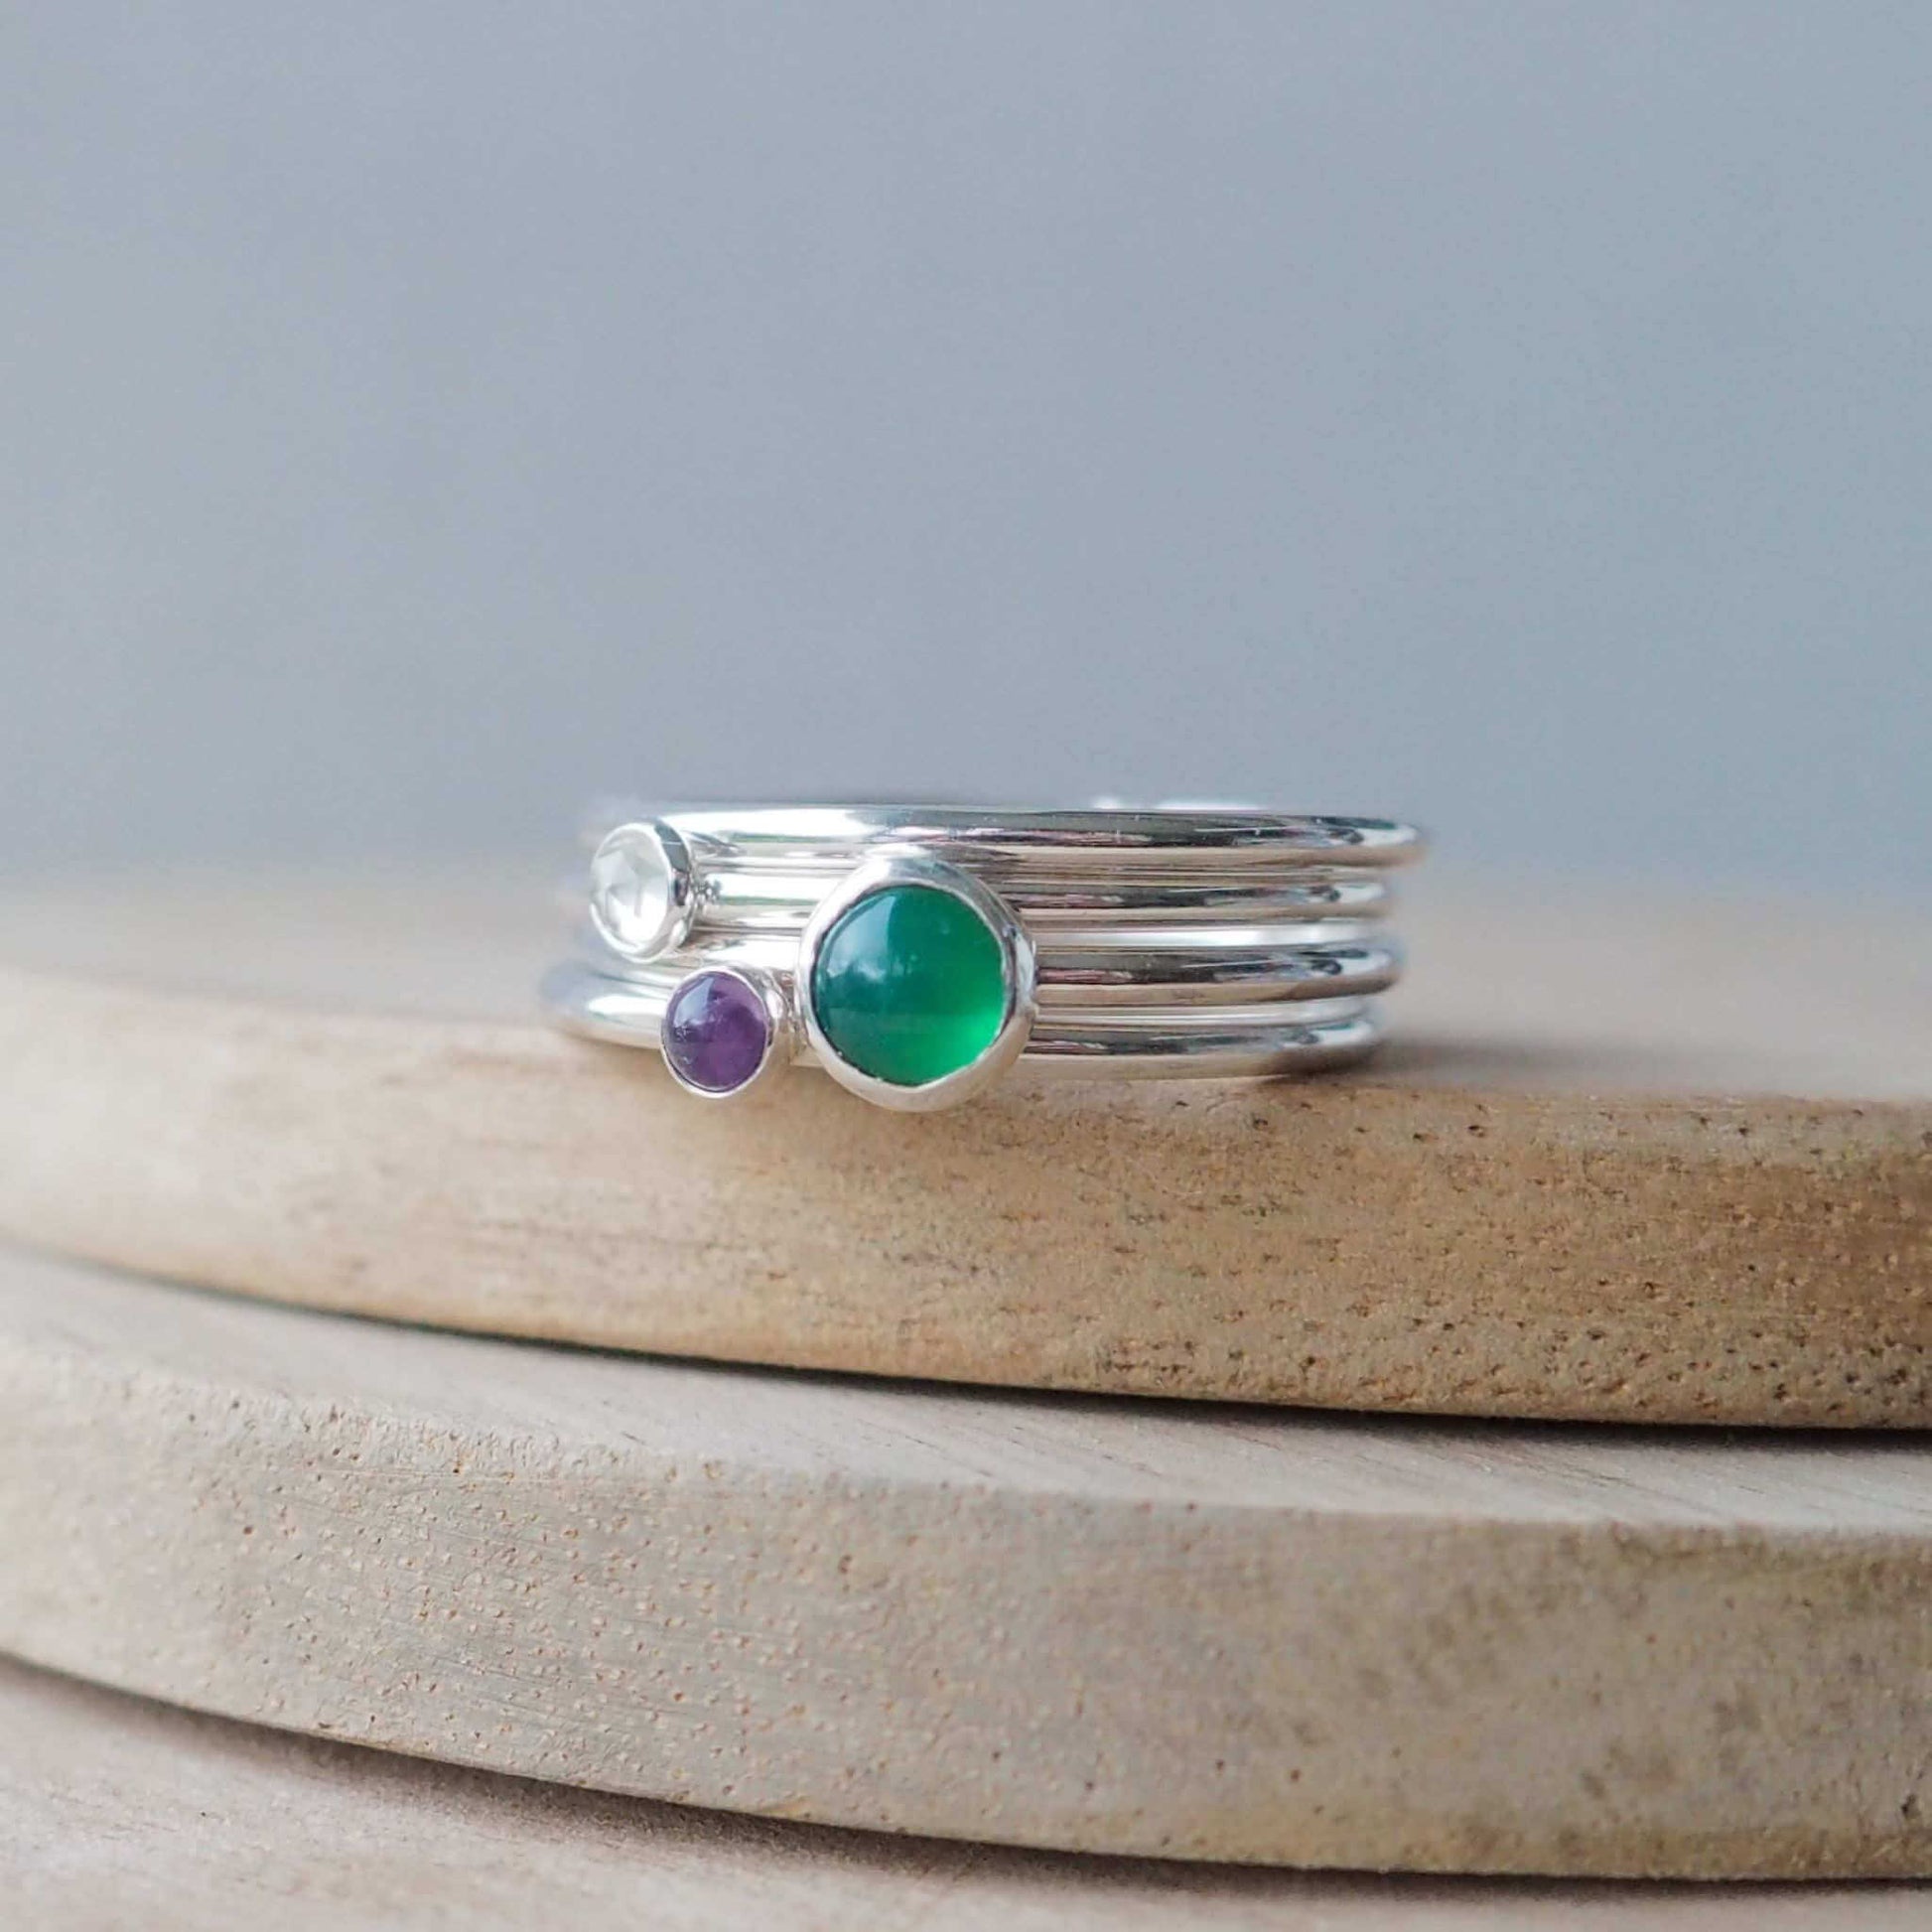 Three Birthstone Ring set made from Sterling Silver, with a 5mm round Green Agate Birthstone for May, and two smaller 3mm gemstones in White Topaz for April and Amethyst for February. The gemstones colours are emerald green, purple and clear. Handmade in Scotland by Maram Jewellery